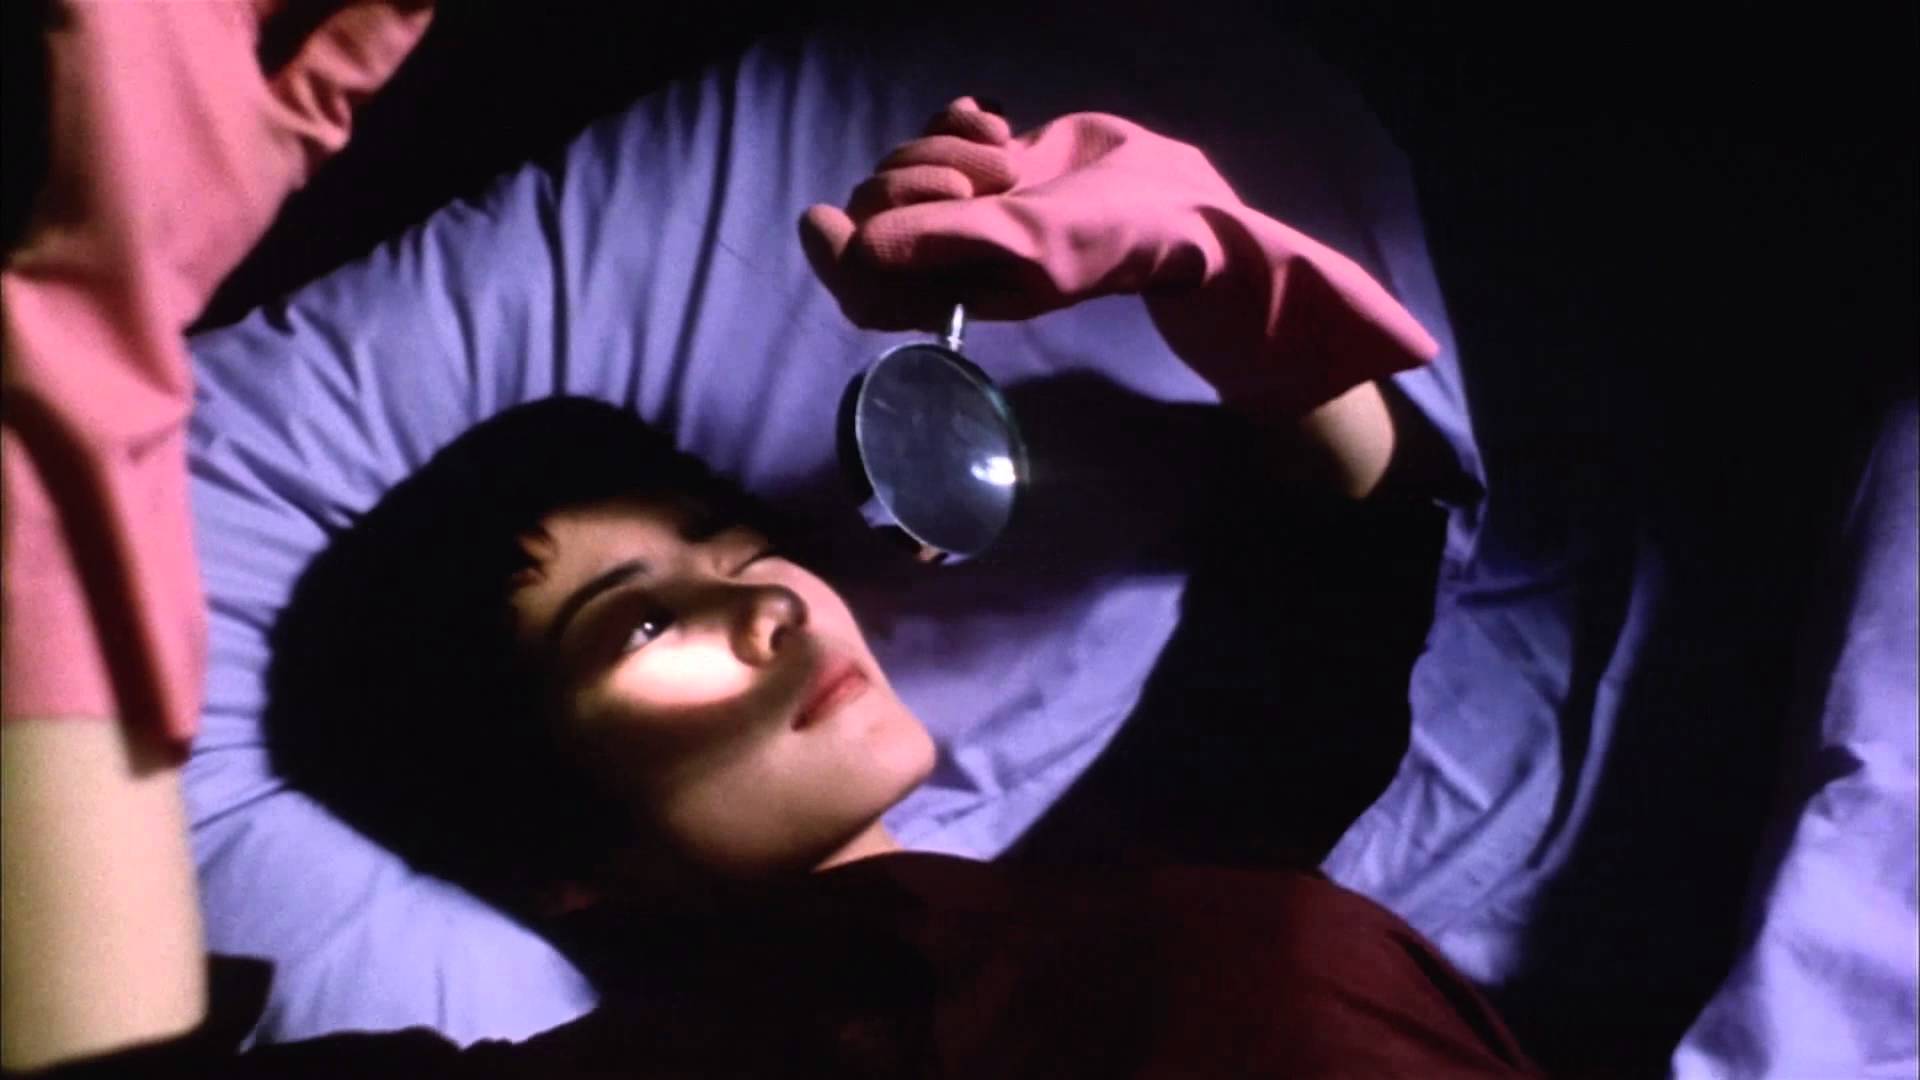 In Dreams: 20 Years of 'Chungking Express'